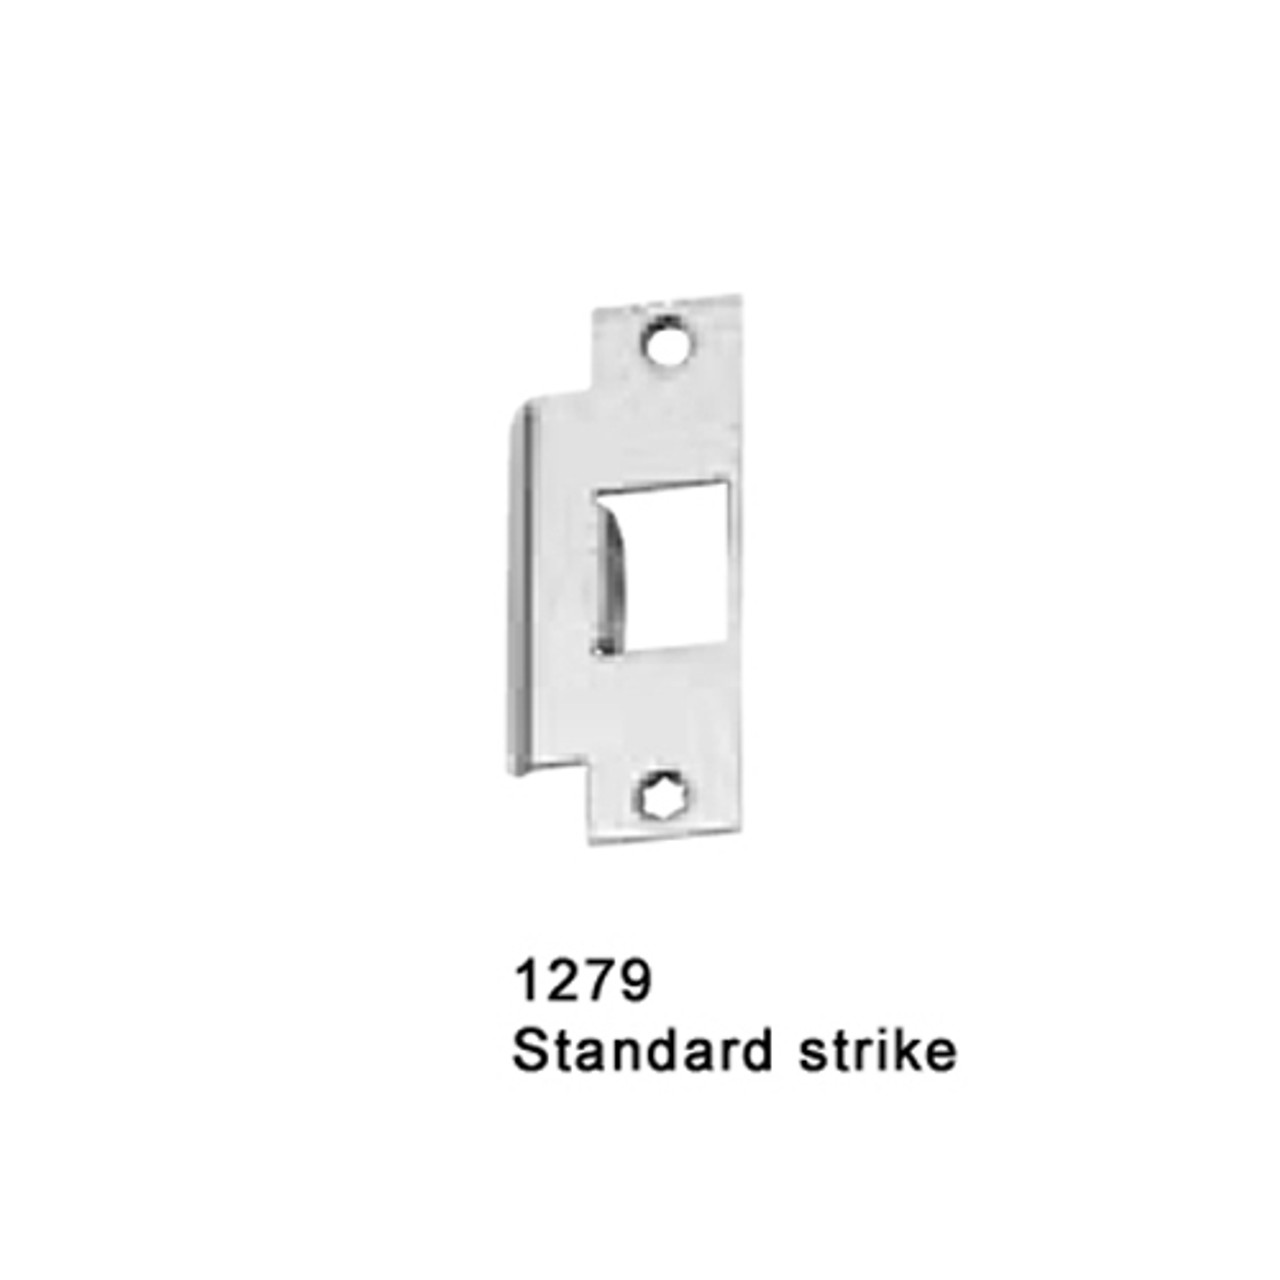 CD25-M-L-BE-DANE-US32D-4-RHR Falcon 25 Series Mortise Lock Devices 510L-BE Dane Lever Trim with Blank Escutcheon in Satin Stainless Steel